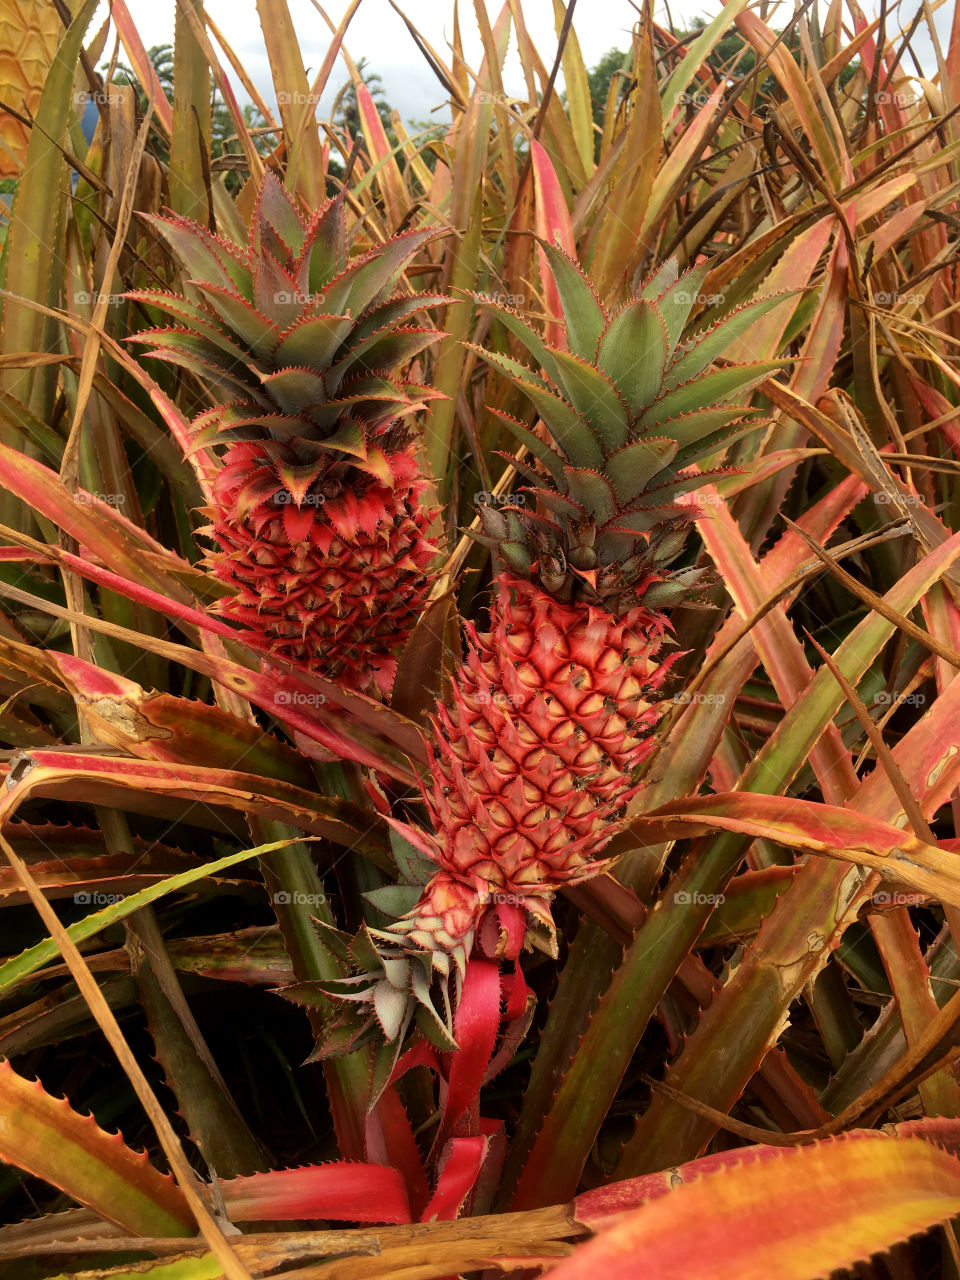 Pineapples growing on plant